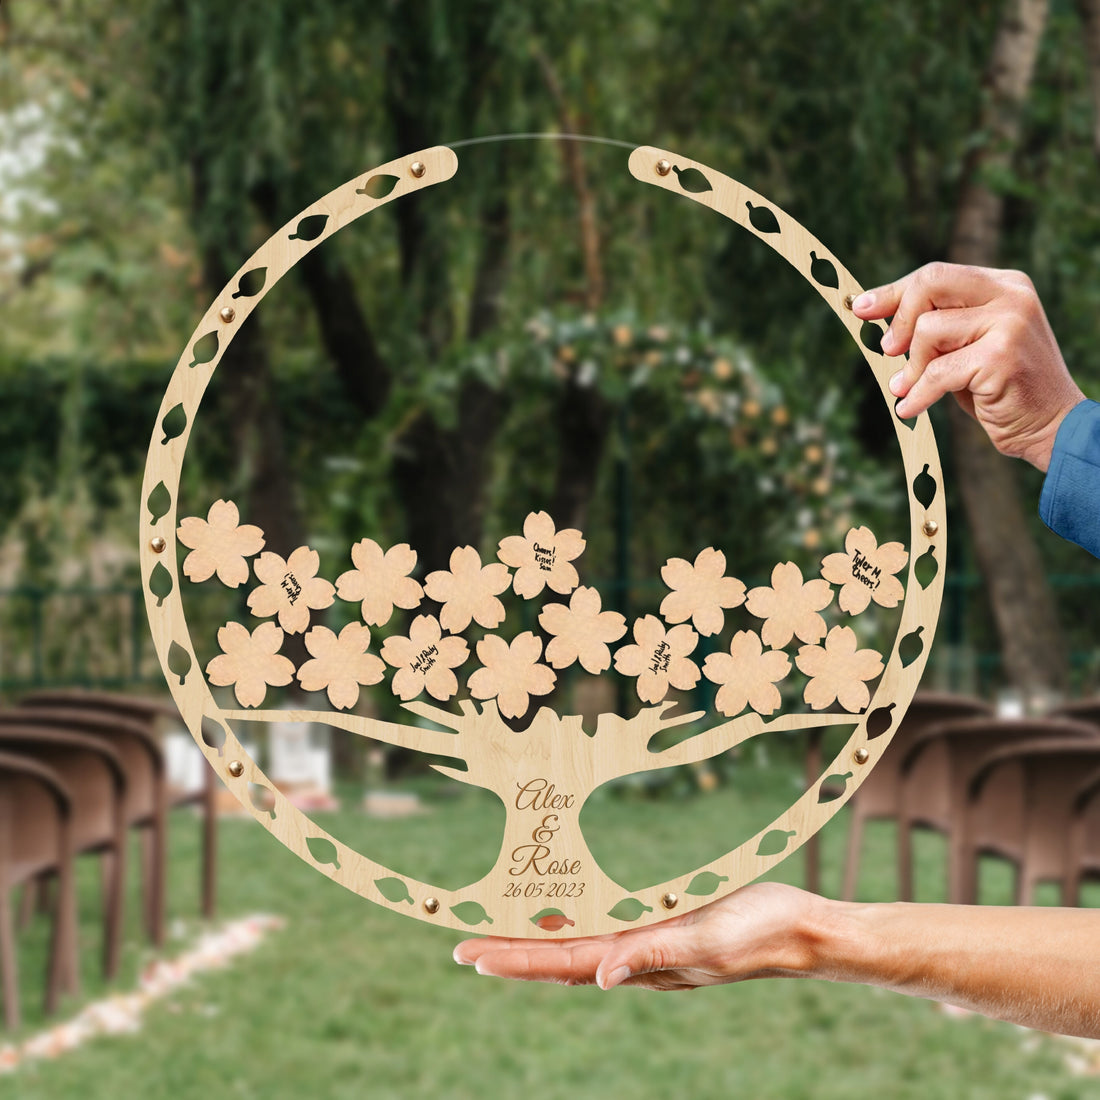 Custom Laser Cut Wooden Acrylic Tree of Leaves, Wedding Round Drop Box, Rustic Personalised Circle Guest Book Alternative, Stationery Decor